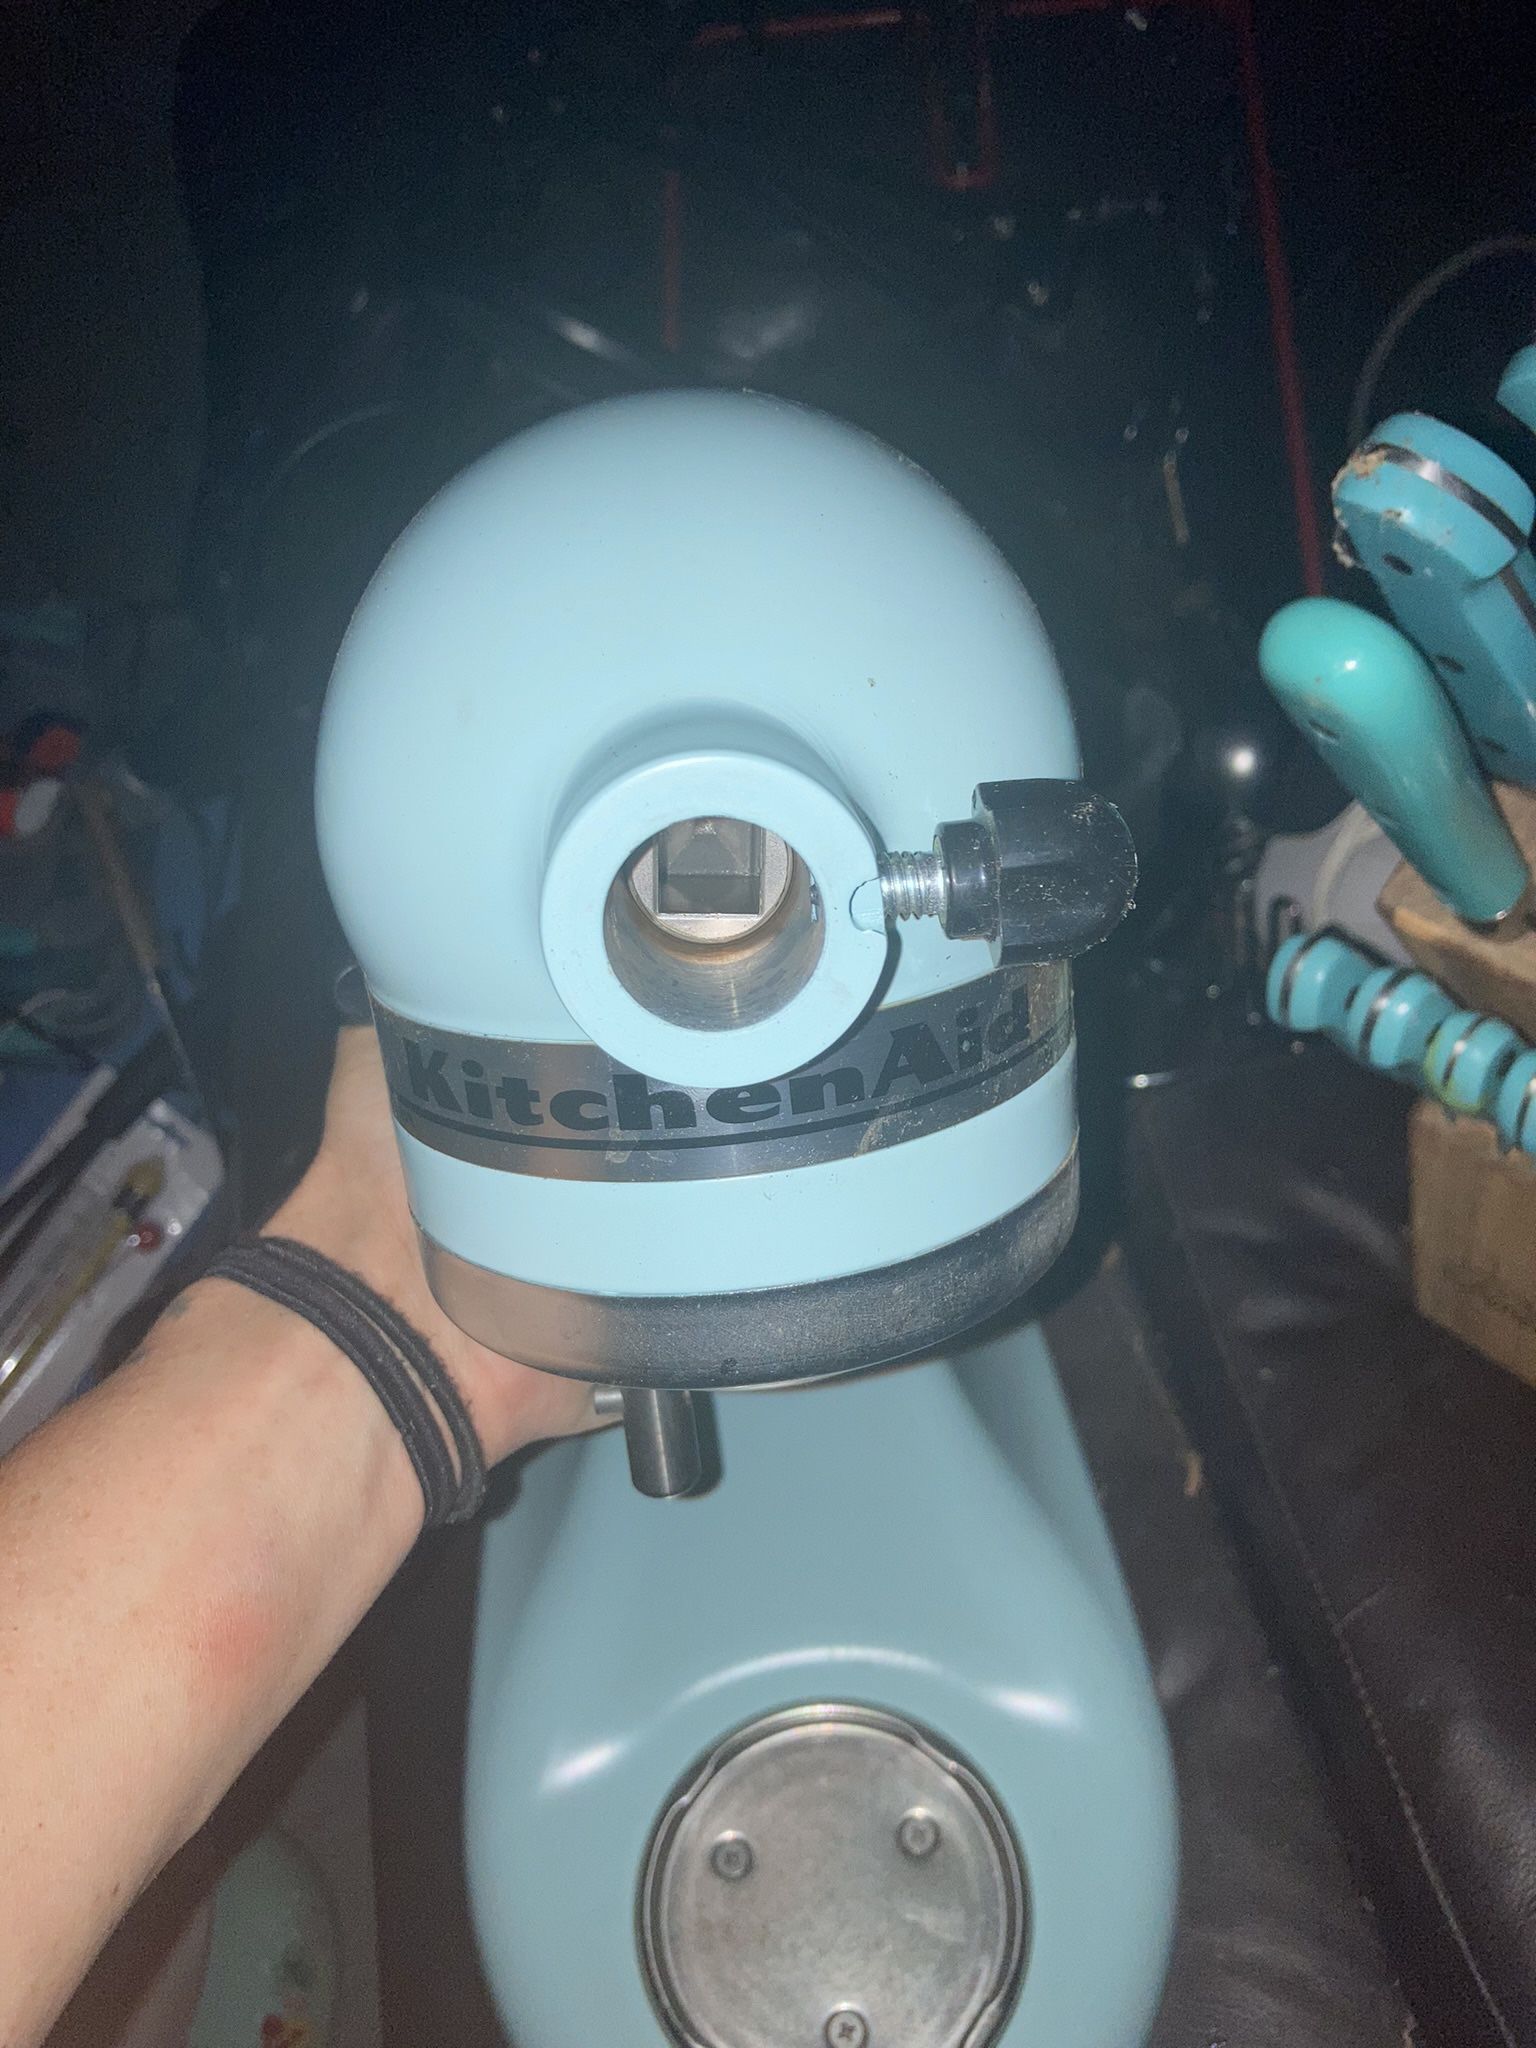 Kitchen Aid Professional 5qt Teal Stand Mixer for Sale in Chesapeake, VA -  OfferUp